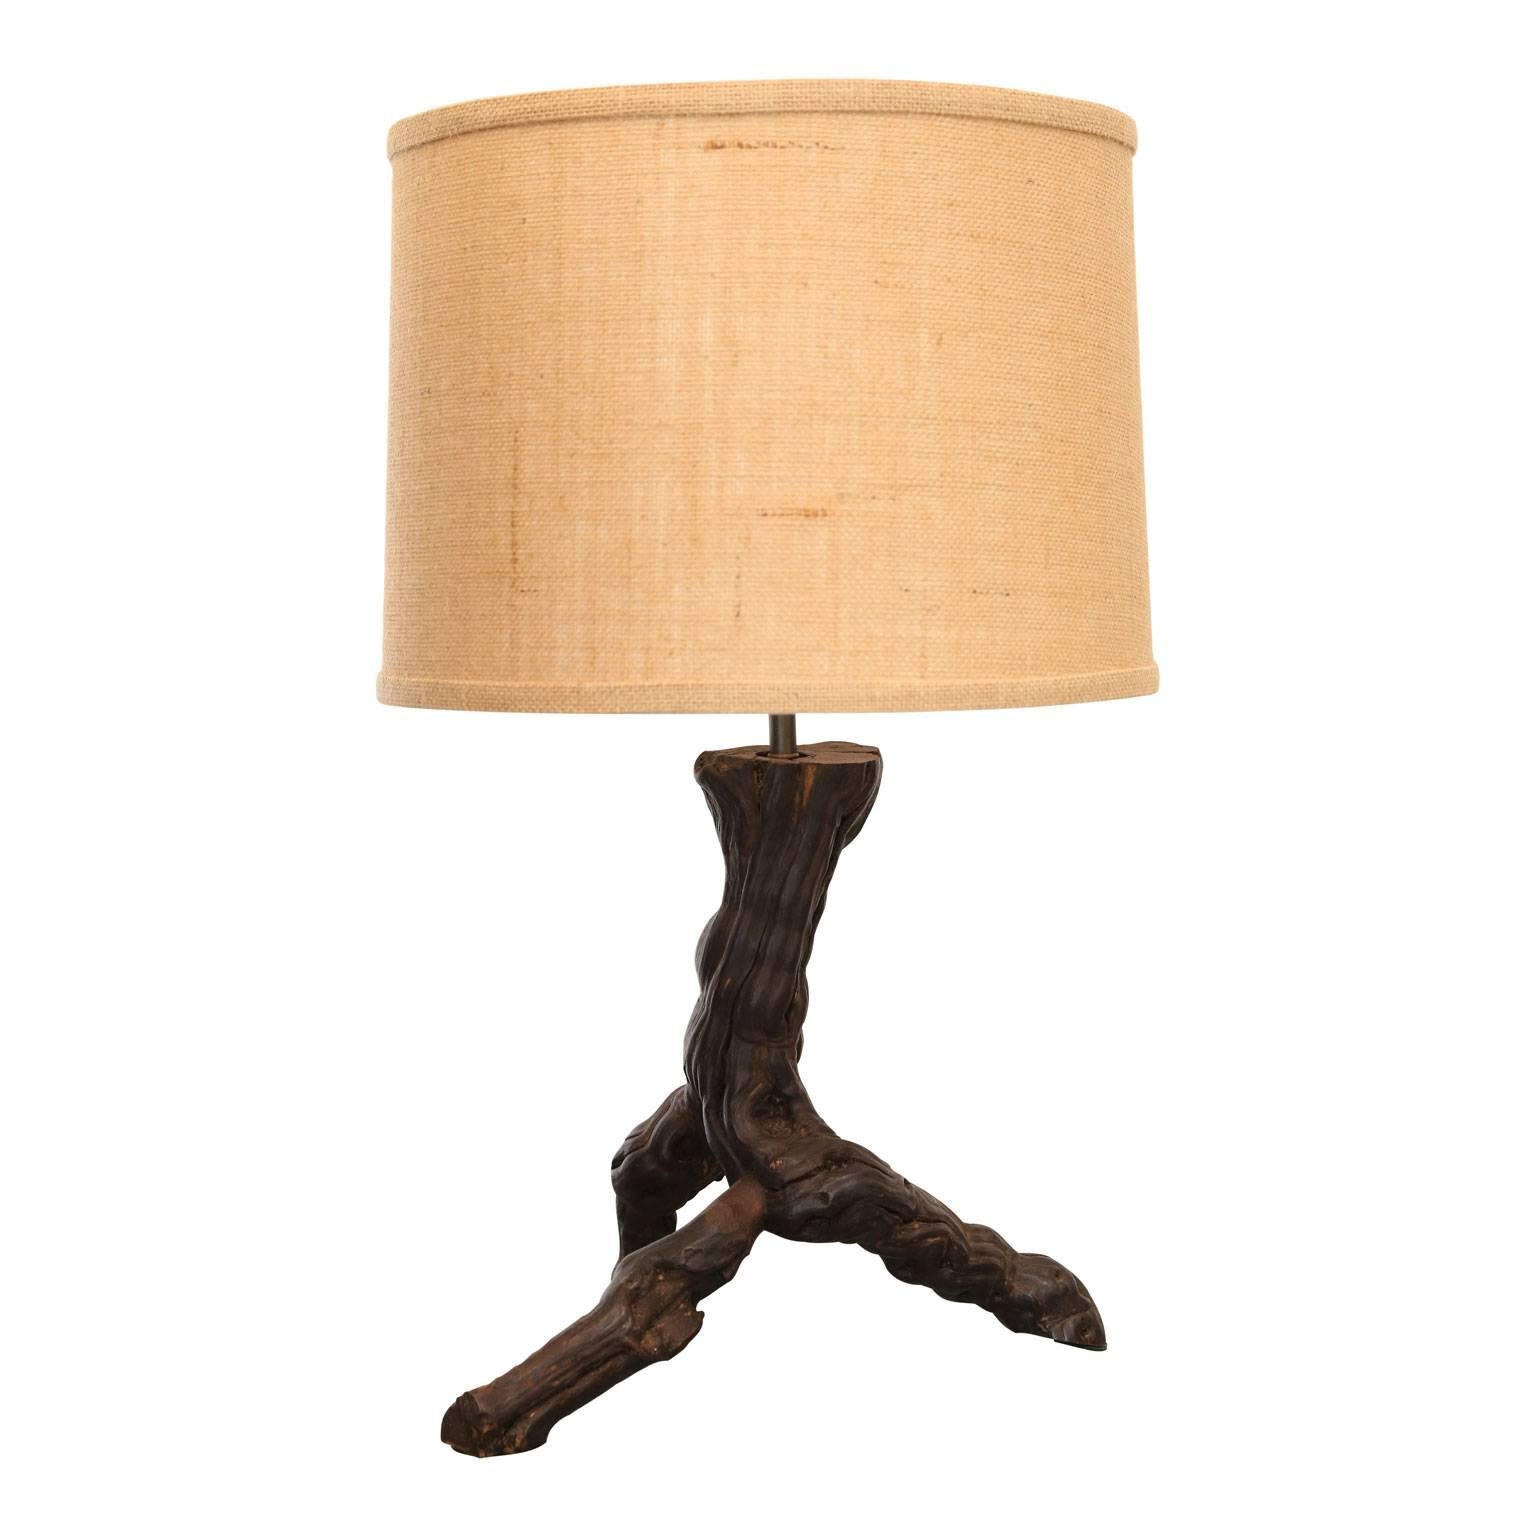 Near pair of root lamps: custom vintage French table lamps, from tree roots, newly-wired for use within the USA. Sold with new complementary burlap shades (measurements include the shades). These versatile lamps add rich color and texture to a space